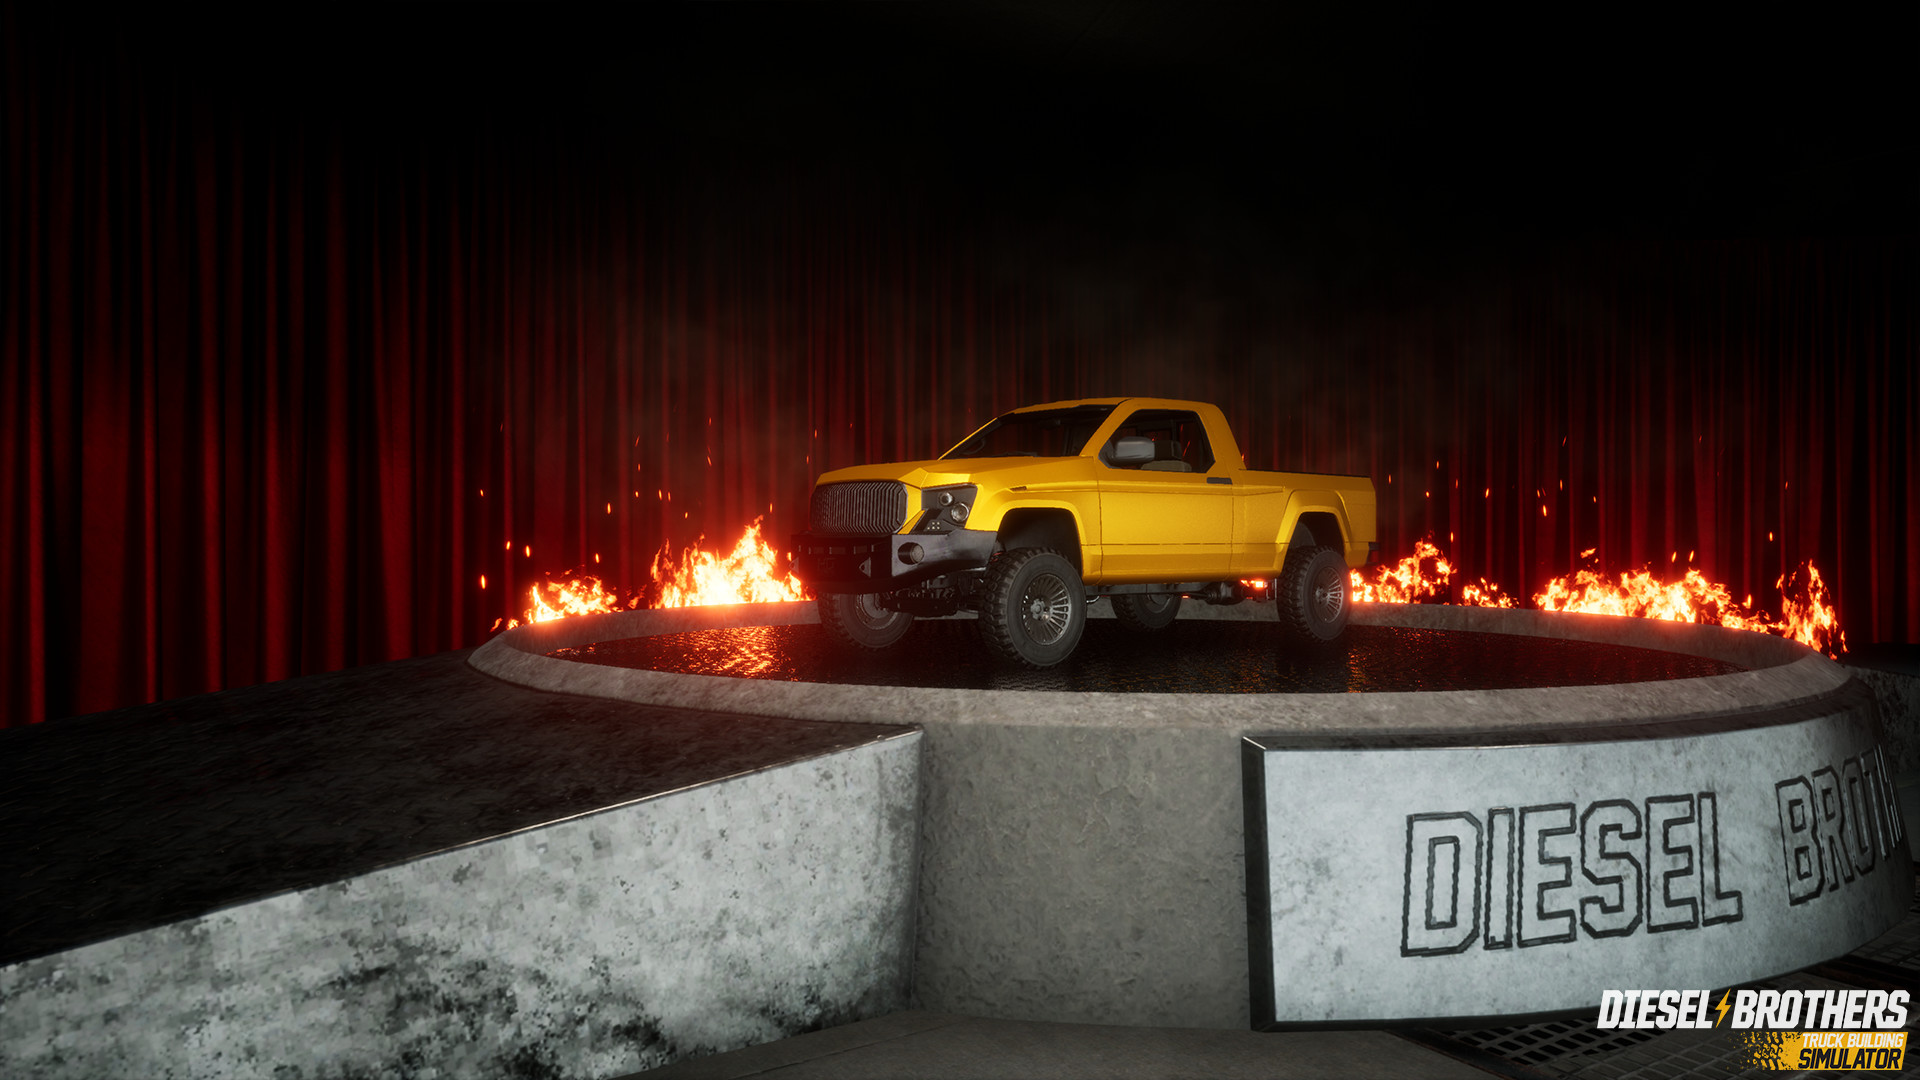 Save 85% on Diesel Brothers: Truck Building Simulator on Steam